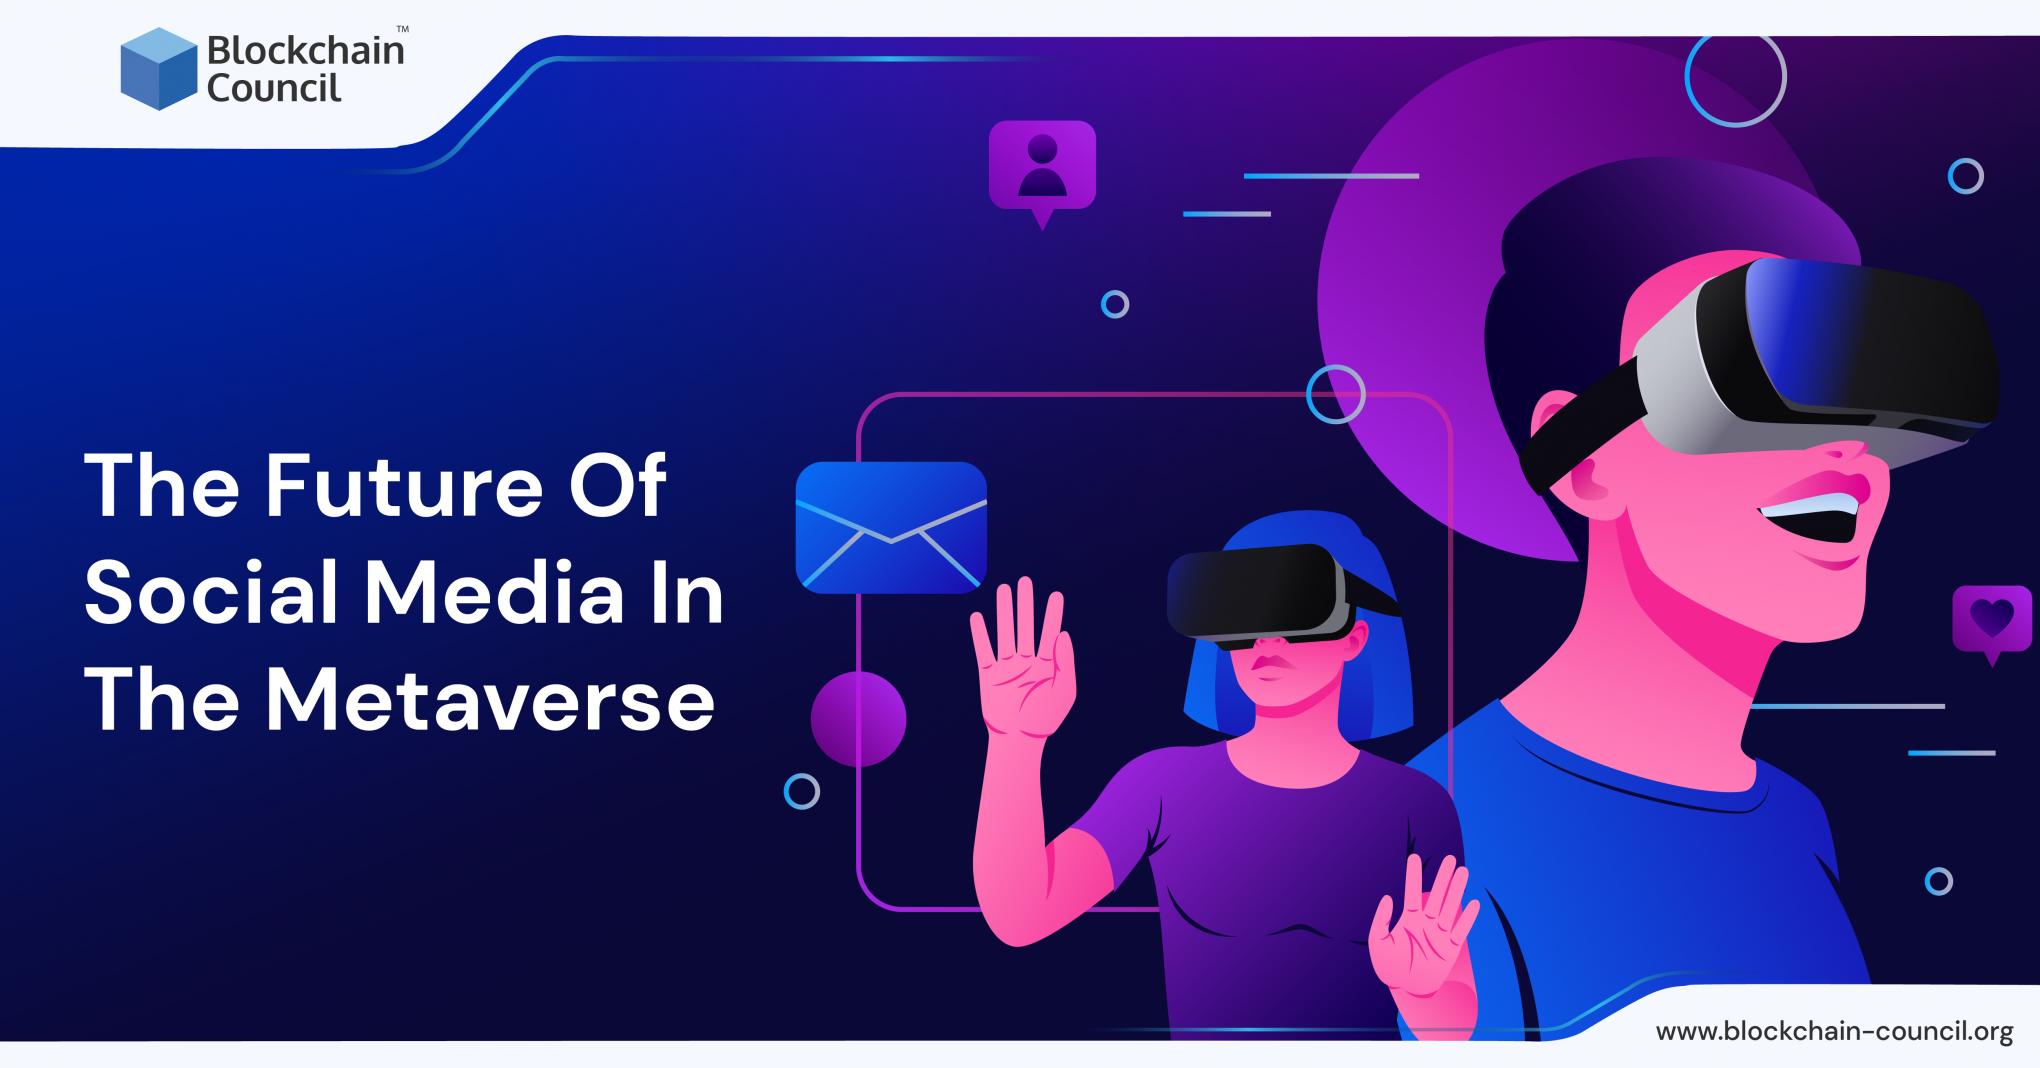 The Future Of Social Media In The Metaverse